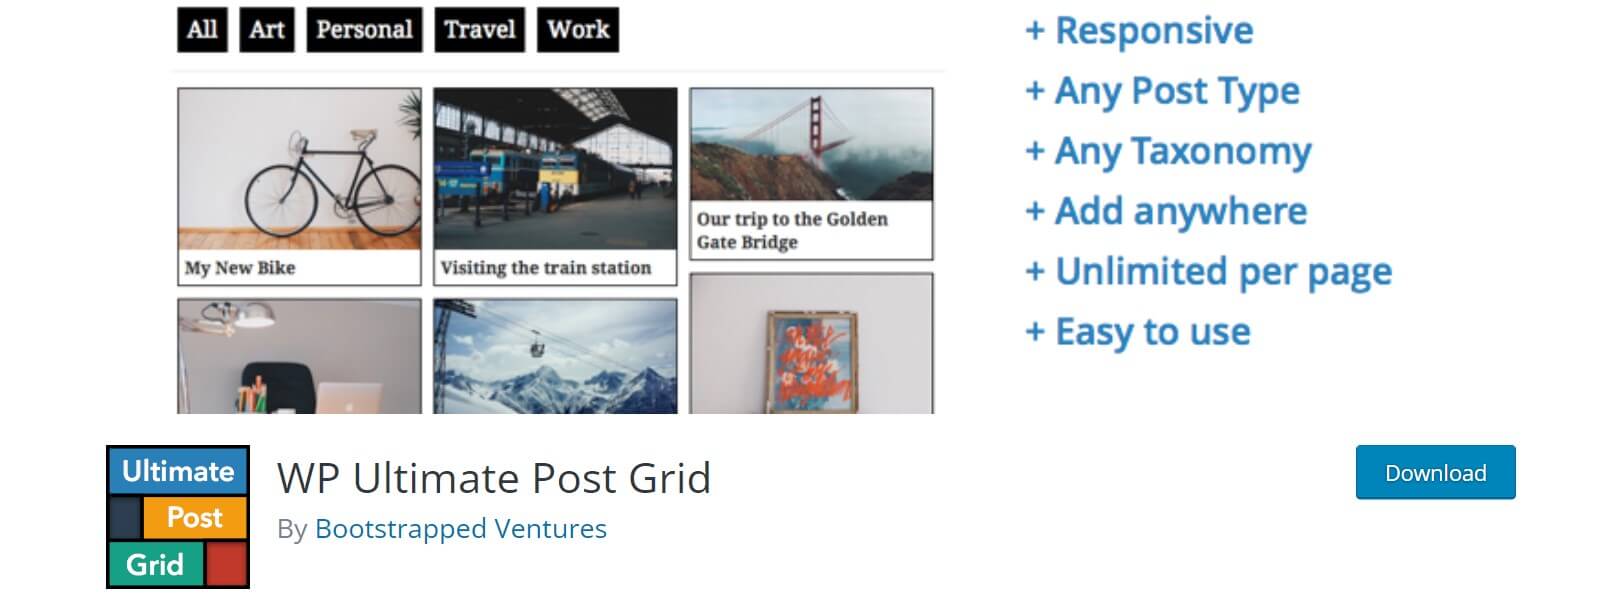 wp ultimate post grid